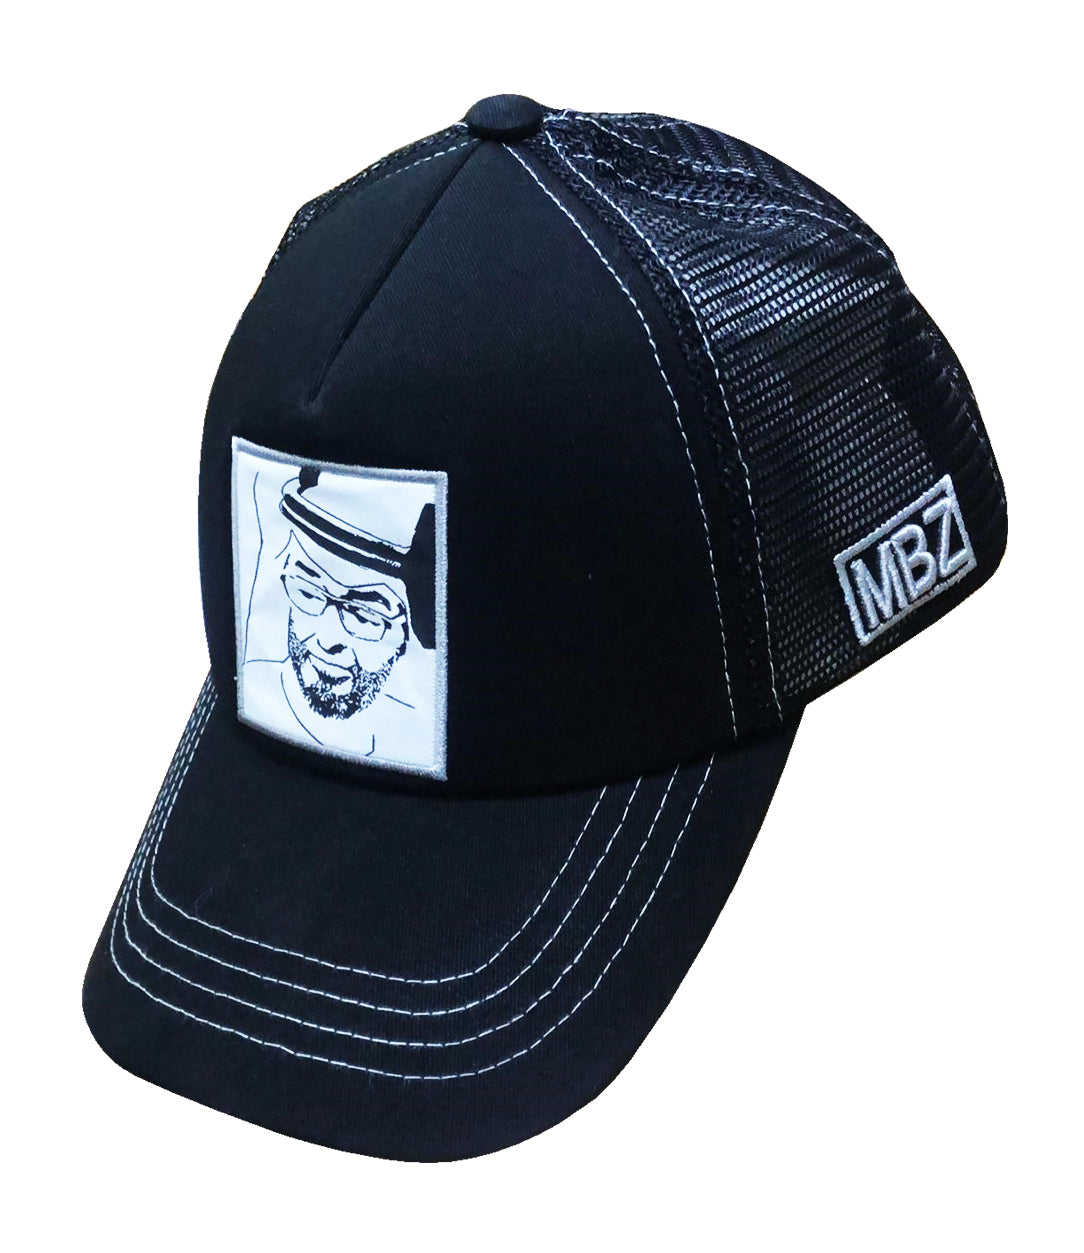 Mohammed BinZayed Cap Black | gifts for her or him